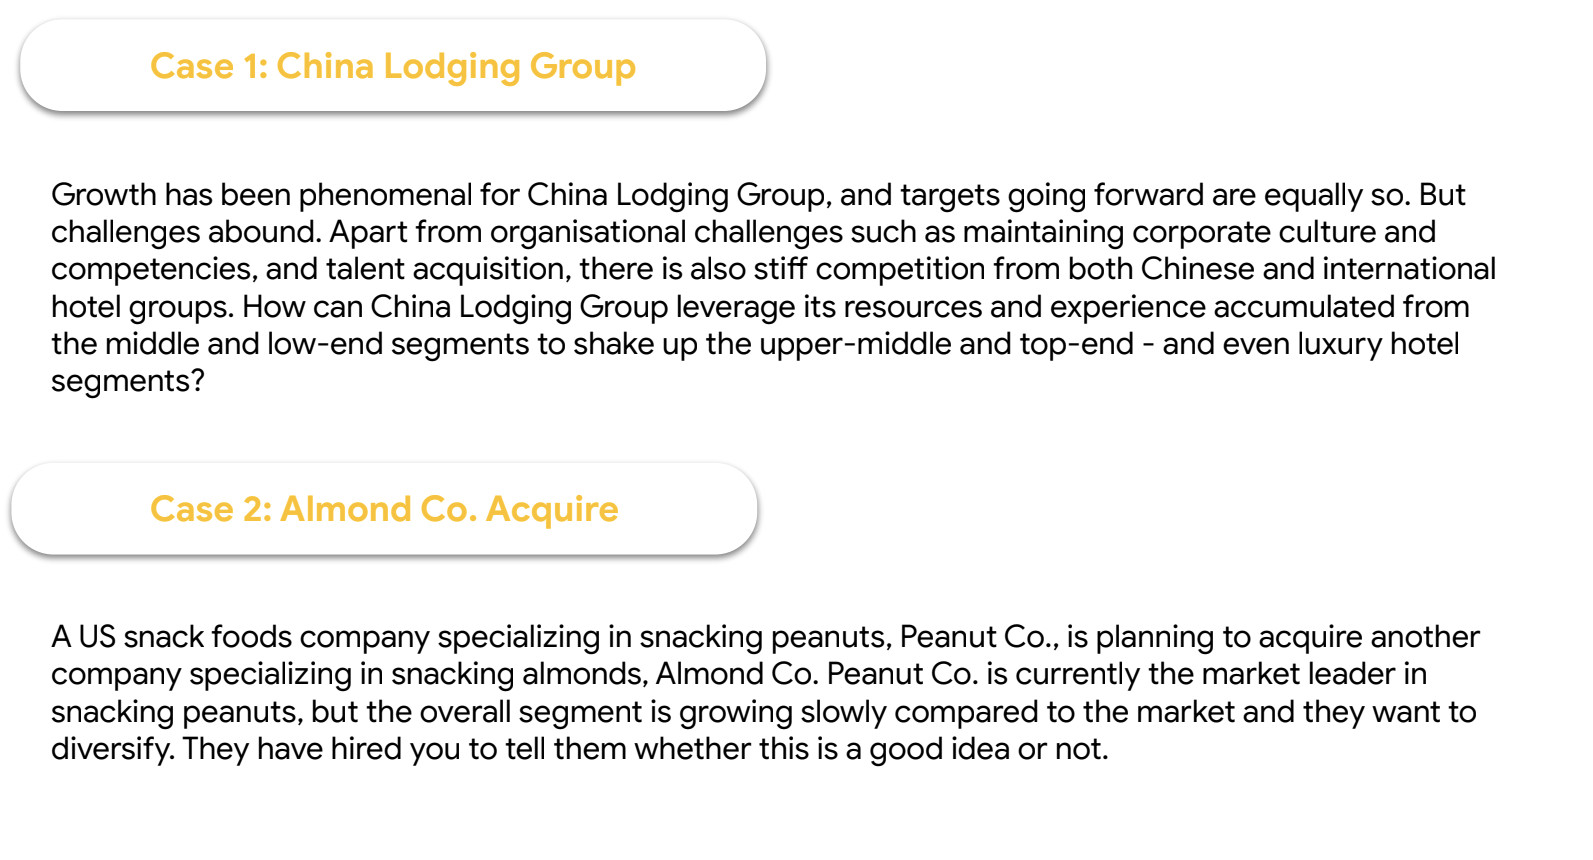 china lodging group case study solution